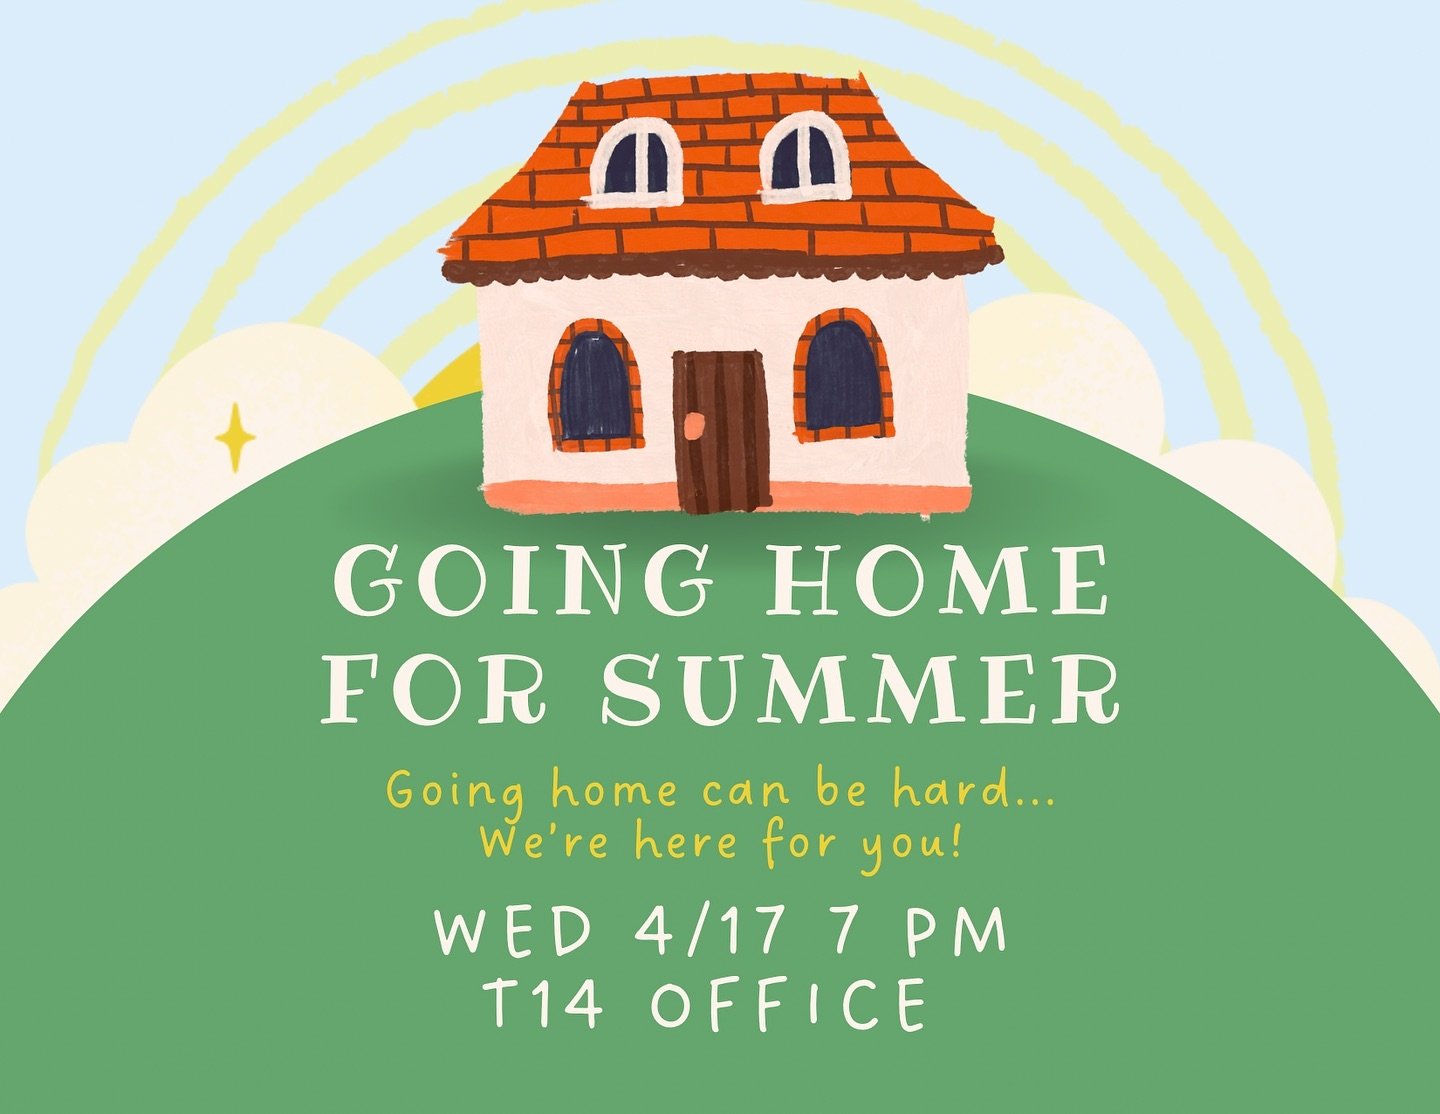 Hello fellow gay! Our last Wednesday Night Special of the semester is Going Home For Summer! We understand that being at home is challenging for some LGBTQIA+ folks. Come get some advice and maybe even share a little about how you deal with your expe